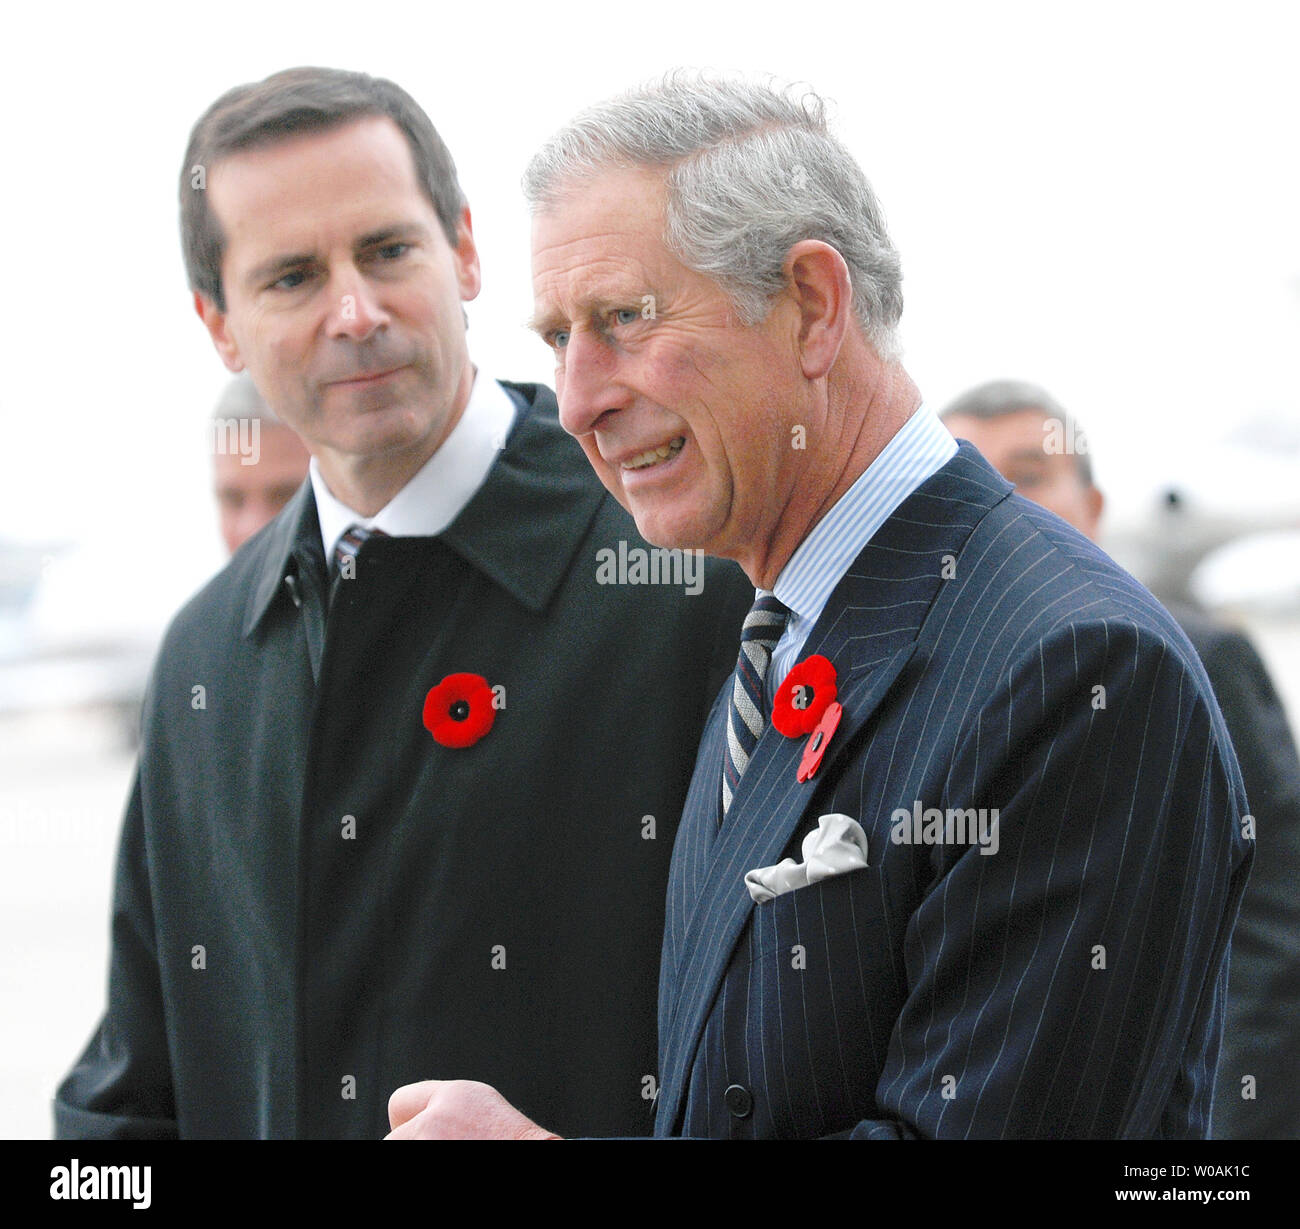 Britain's Prince Charles (R) and Ontario premier Dalton McGuinty chat on the tarmac as the Prince and his wife Camilla, Duchess of Cornwall, arrive at Pearson International Airport in Toronto, Canada on November 4, 2009.  The royal couple are on an 11-day tour of Canada.  UPI /Christine Chew Stock Photo